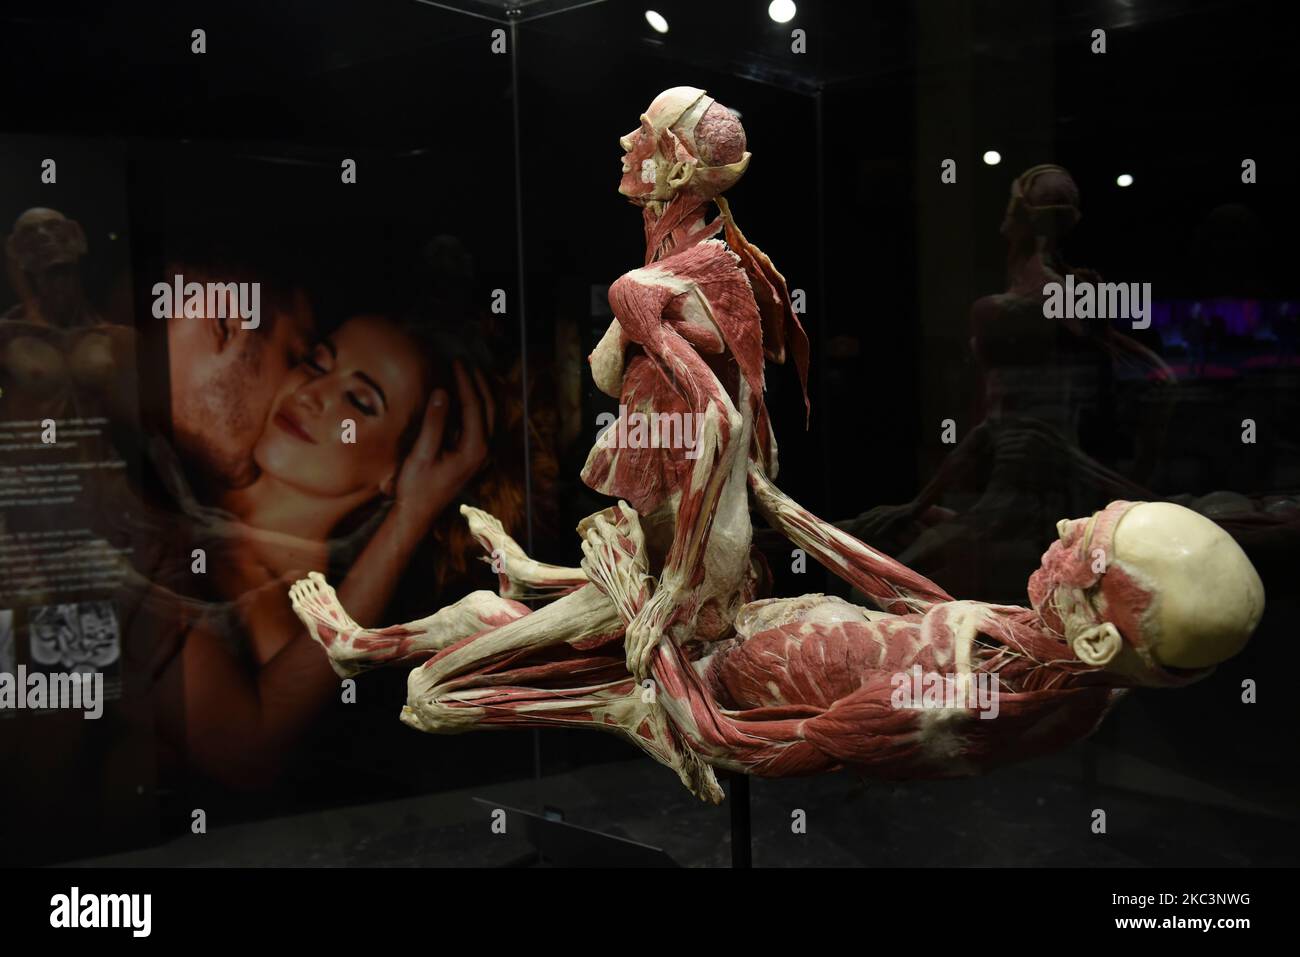 Milan, Italy. 4th Nov, 2022. Plastinator Dr. GUNTHER VON HAGENS and curator Dr AGELINA WHALLEY will present their latest exhibition BODY WORLDS - The Rhythm Of Life, in Milan, Italy.The exhibit is uniquely curated by Dr. ANGELINA WHALLEY to showcase the fragility, resilience and strength of the human body. The extraordinary real specimens demonstrate the complexity, resilience and vulnerability of the human body. The exhibition presents the body in health and distress, its vulnerabilities and potentials, and many of the challenges the human body faces as it navigates the 21st century. (Cre Stock Photo